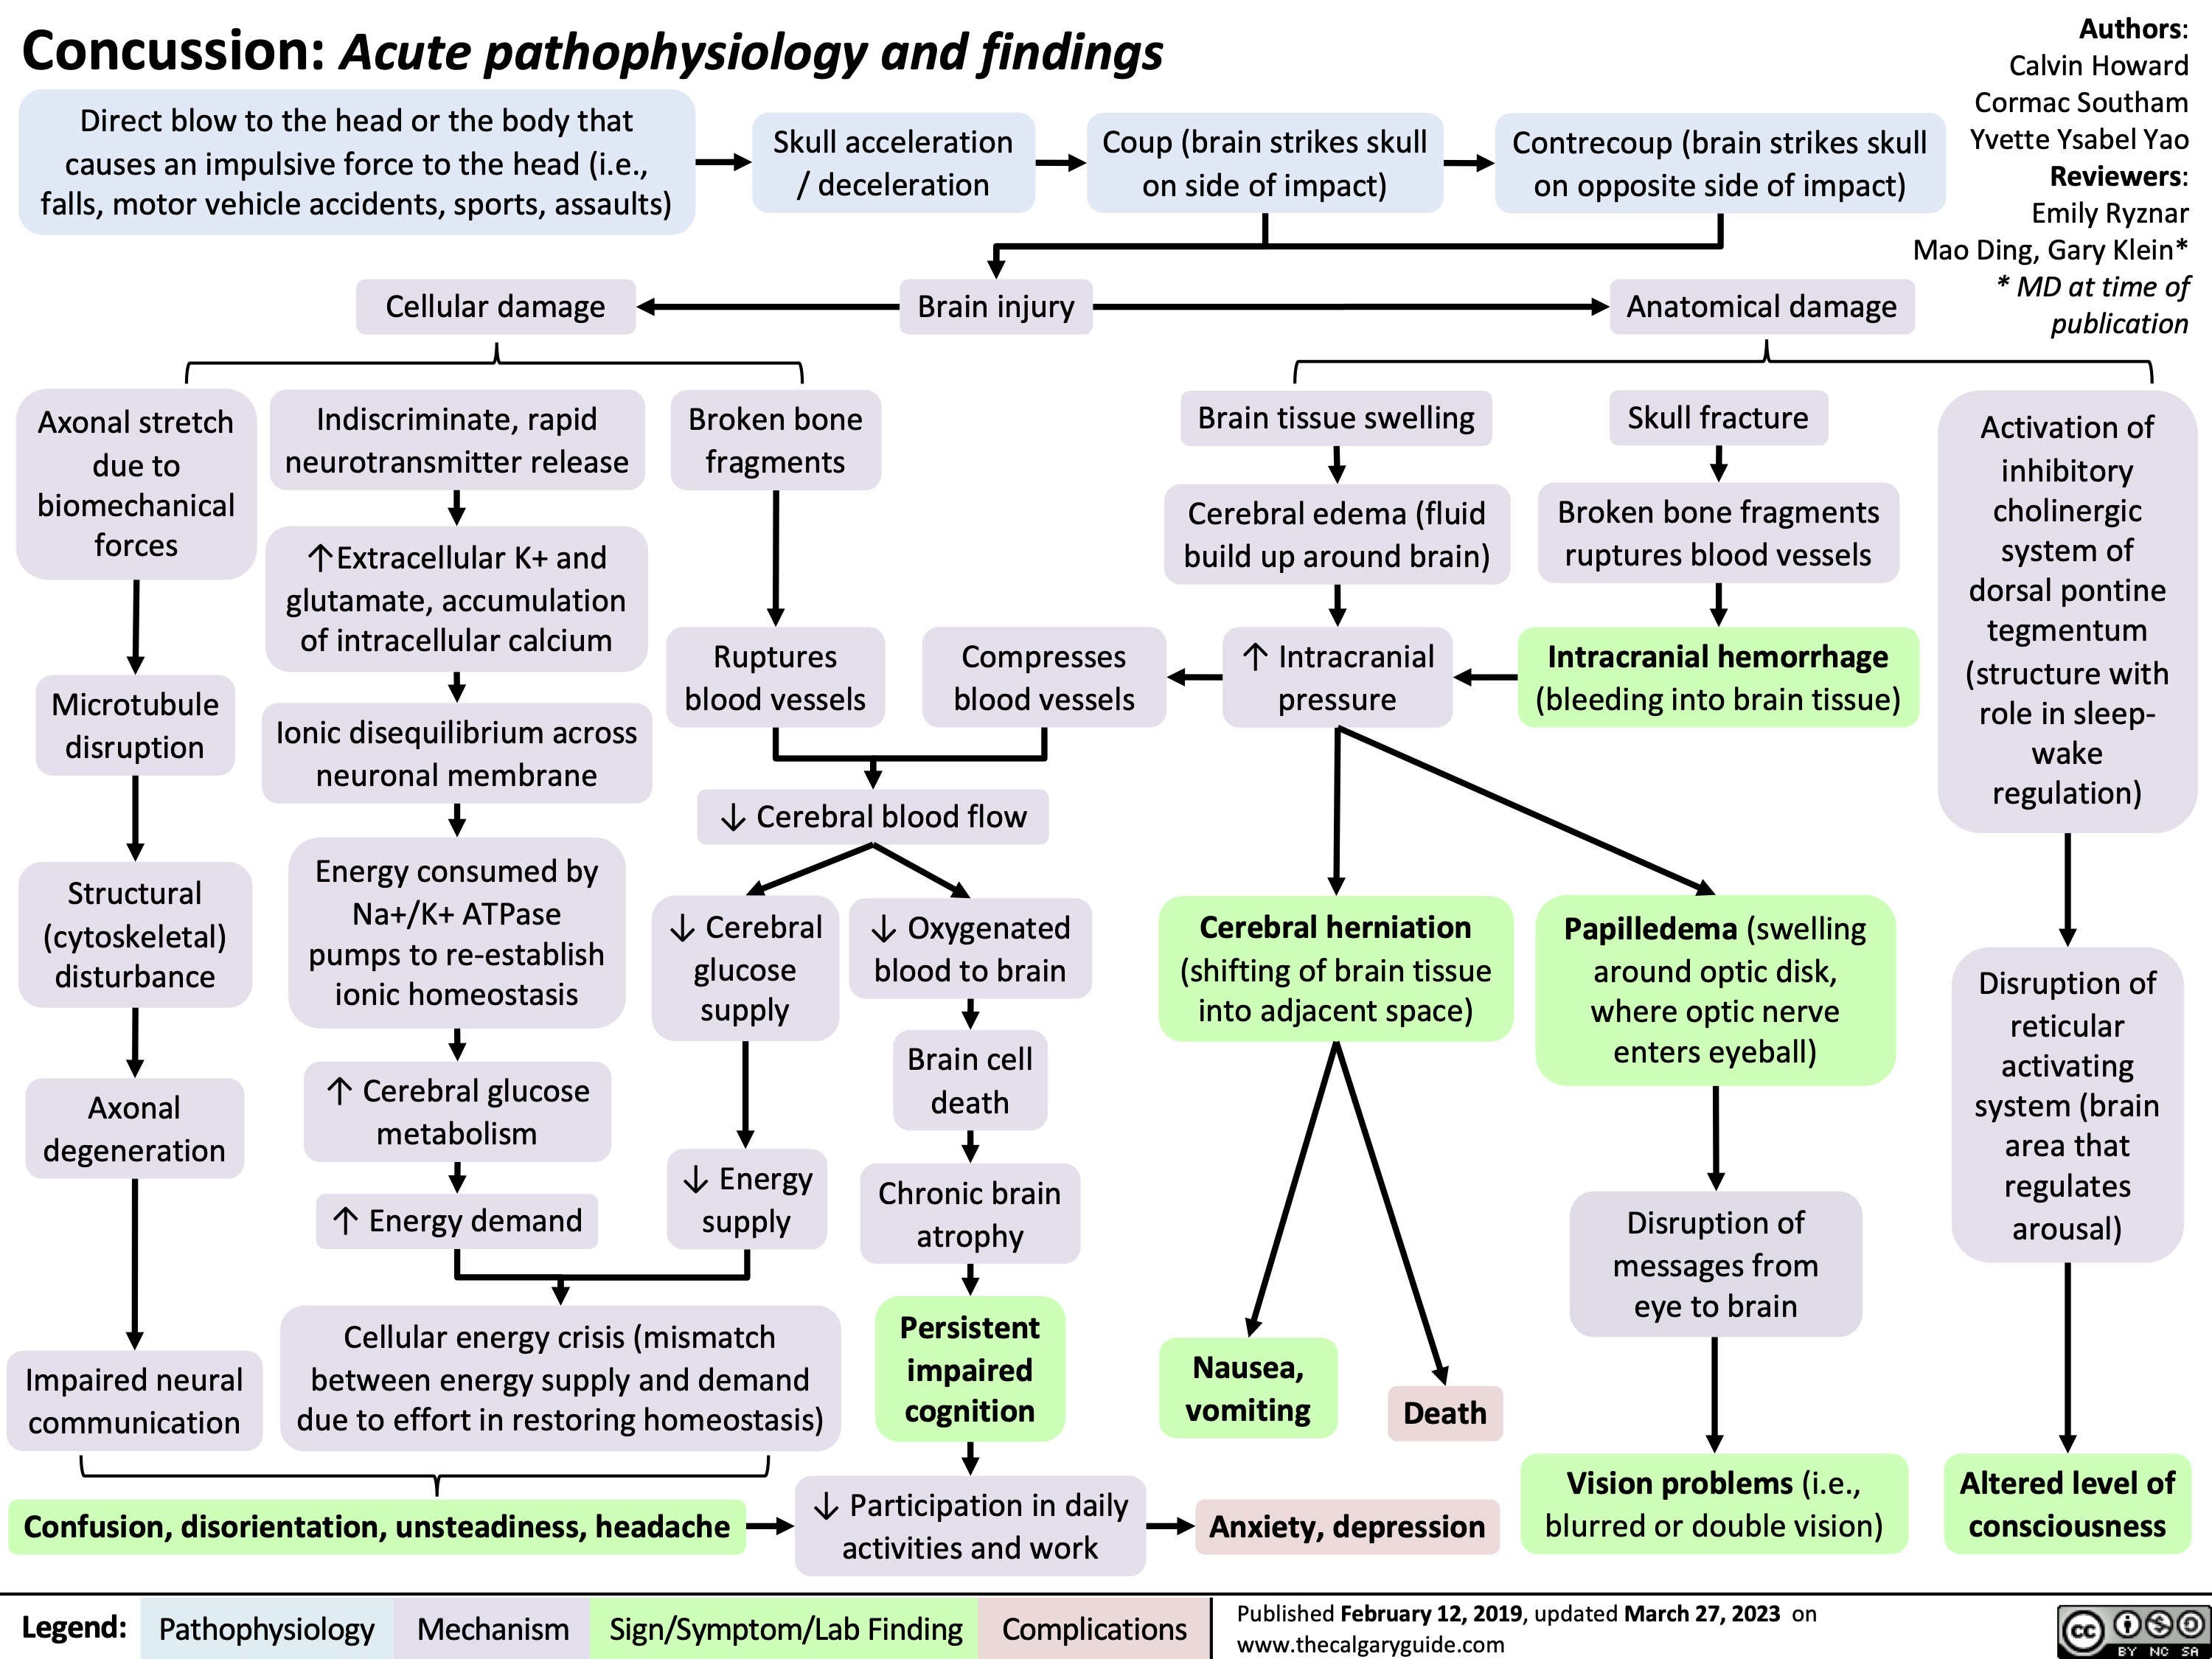 Concussion: Acute pathophysiology and findings
Authors: Calvin Howard Cormac Southam Yvette Ysabel Yao Reviewers: Emily Ryznar Mao Ding, Gary Klein* * MD at time of publication
Activation of inhibitory
cholinergic system of dorsal pontine tegmentum (structure with role in sleep- wake regulation)
Disruption of reticular activating system (brain area that regulates arousal)
Altered level of consciousness
 Direct blow to the head or the body that causes an impulsive force to the head (i.e., falls, motor vehicle accidents, sports, assaults)
Skull acceleration / deceleration
Coup (brain strikes skull on side of impact)
Brain tissue swelling
Cerebral edema (fluid build up around brain)
↑ Intracranial pressure
Cerebral herniation
(shifting of brain tissue into adjacent space)
Contrecoup (brain strikes skull on opposite side of impact)
Anatomical damage
Skull fracture
Broken bone fragments ruptures blood vessels
Intracranial hemorrhage
(bleeding into brain tissue)
Papilledema (swelling around optic disk, where optic nerve enters eyeball)
Disruption of messages from eye to brain
Vision problems (i.e., blurred or double vision)
        Cellular damage
Indiscriminate, rapid neurotransmitter release
↑Extracellular K+ and glutamate, accumulation of intracellular calcium
Ionic disequilibrium across neuronal membrane
Energy consumed by Na+/K+ ATPase pumps to re-establish ionic homeostasis
↑ Cerebral glucose metabolism
↑ Energy demand
Brain injury
          Axonal stretch due to
biomechanical forces
Microtubule disruption
Structural (cytoskeletal) disturbance
Axonal degeneration
Impaired neural communication
Broken bone fragments
Ruptures blood vessels
Compresses blood vessels
               ↓ Cerebral blood flow
        ↓ Cerebral glucose supply
↓ Energy supply
↓ Oxygenated blood to brain
Brain cell death
Chronic brain atrophy
Persistent impaired cognition
                 Cellular energy crisis (mismatch between energy supply and demand due to effort in restoring homeostasis)
Nausea, vomiting
        ↓ Participation in daily Confusion, disorientation, unsteadiness, headache activities and work
Death Anxiety, depression
   Legend:
 Pathophysiology
 Mechanism
Sign/Symptom/Lab Finding
 Complications
Published February 12, 2019, updated March 27, 2023 on www.thecalgaryguide.com
   